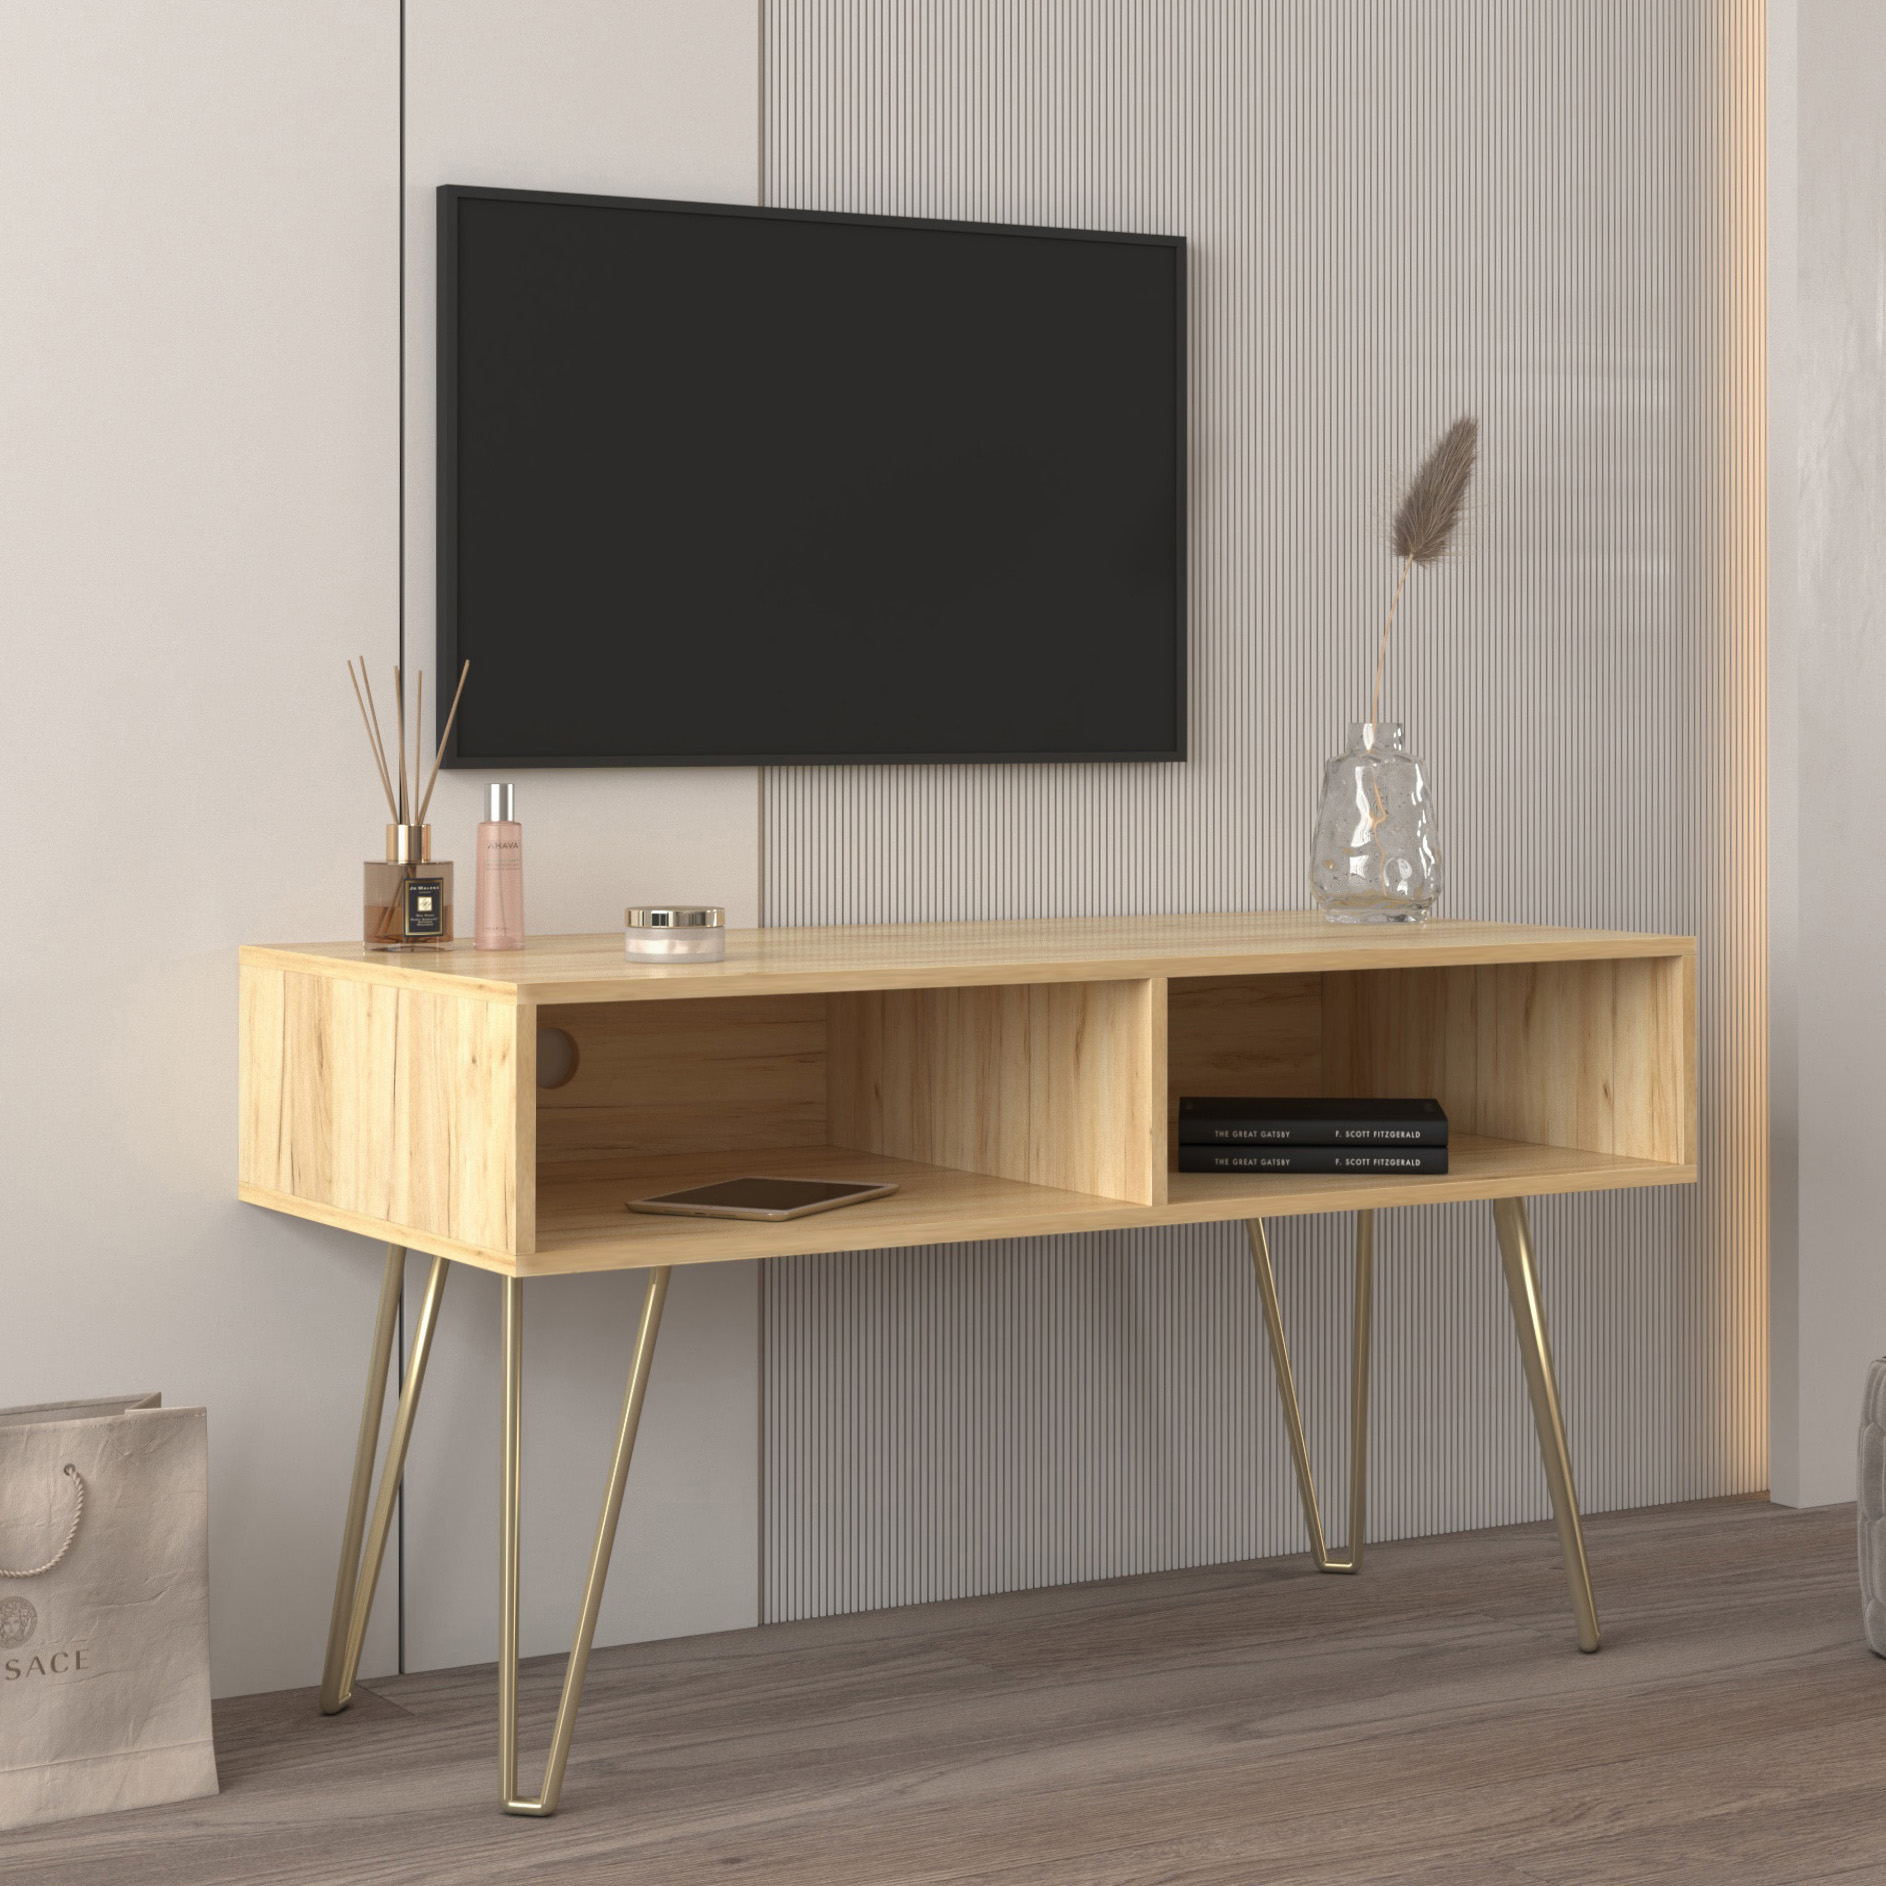 Modern Design TV stand stable Metal Legs  with 2 open shelves to put TV, DVD, router, books, and small ornaments,Fir Wood-CASAINC